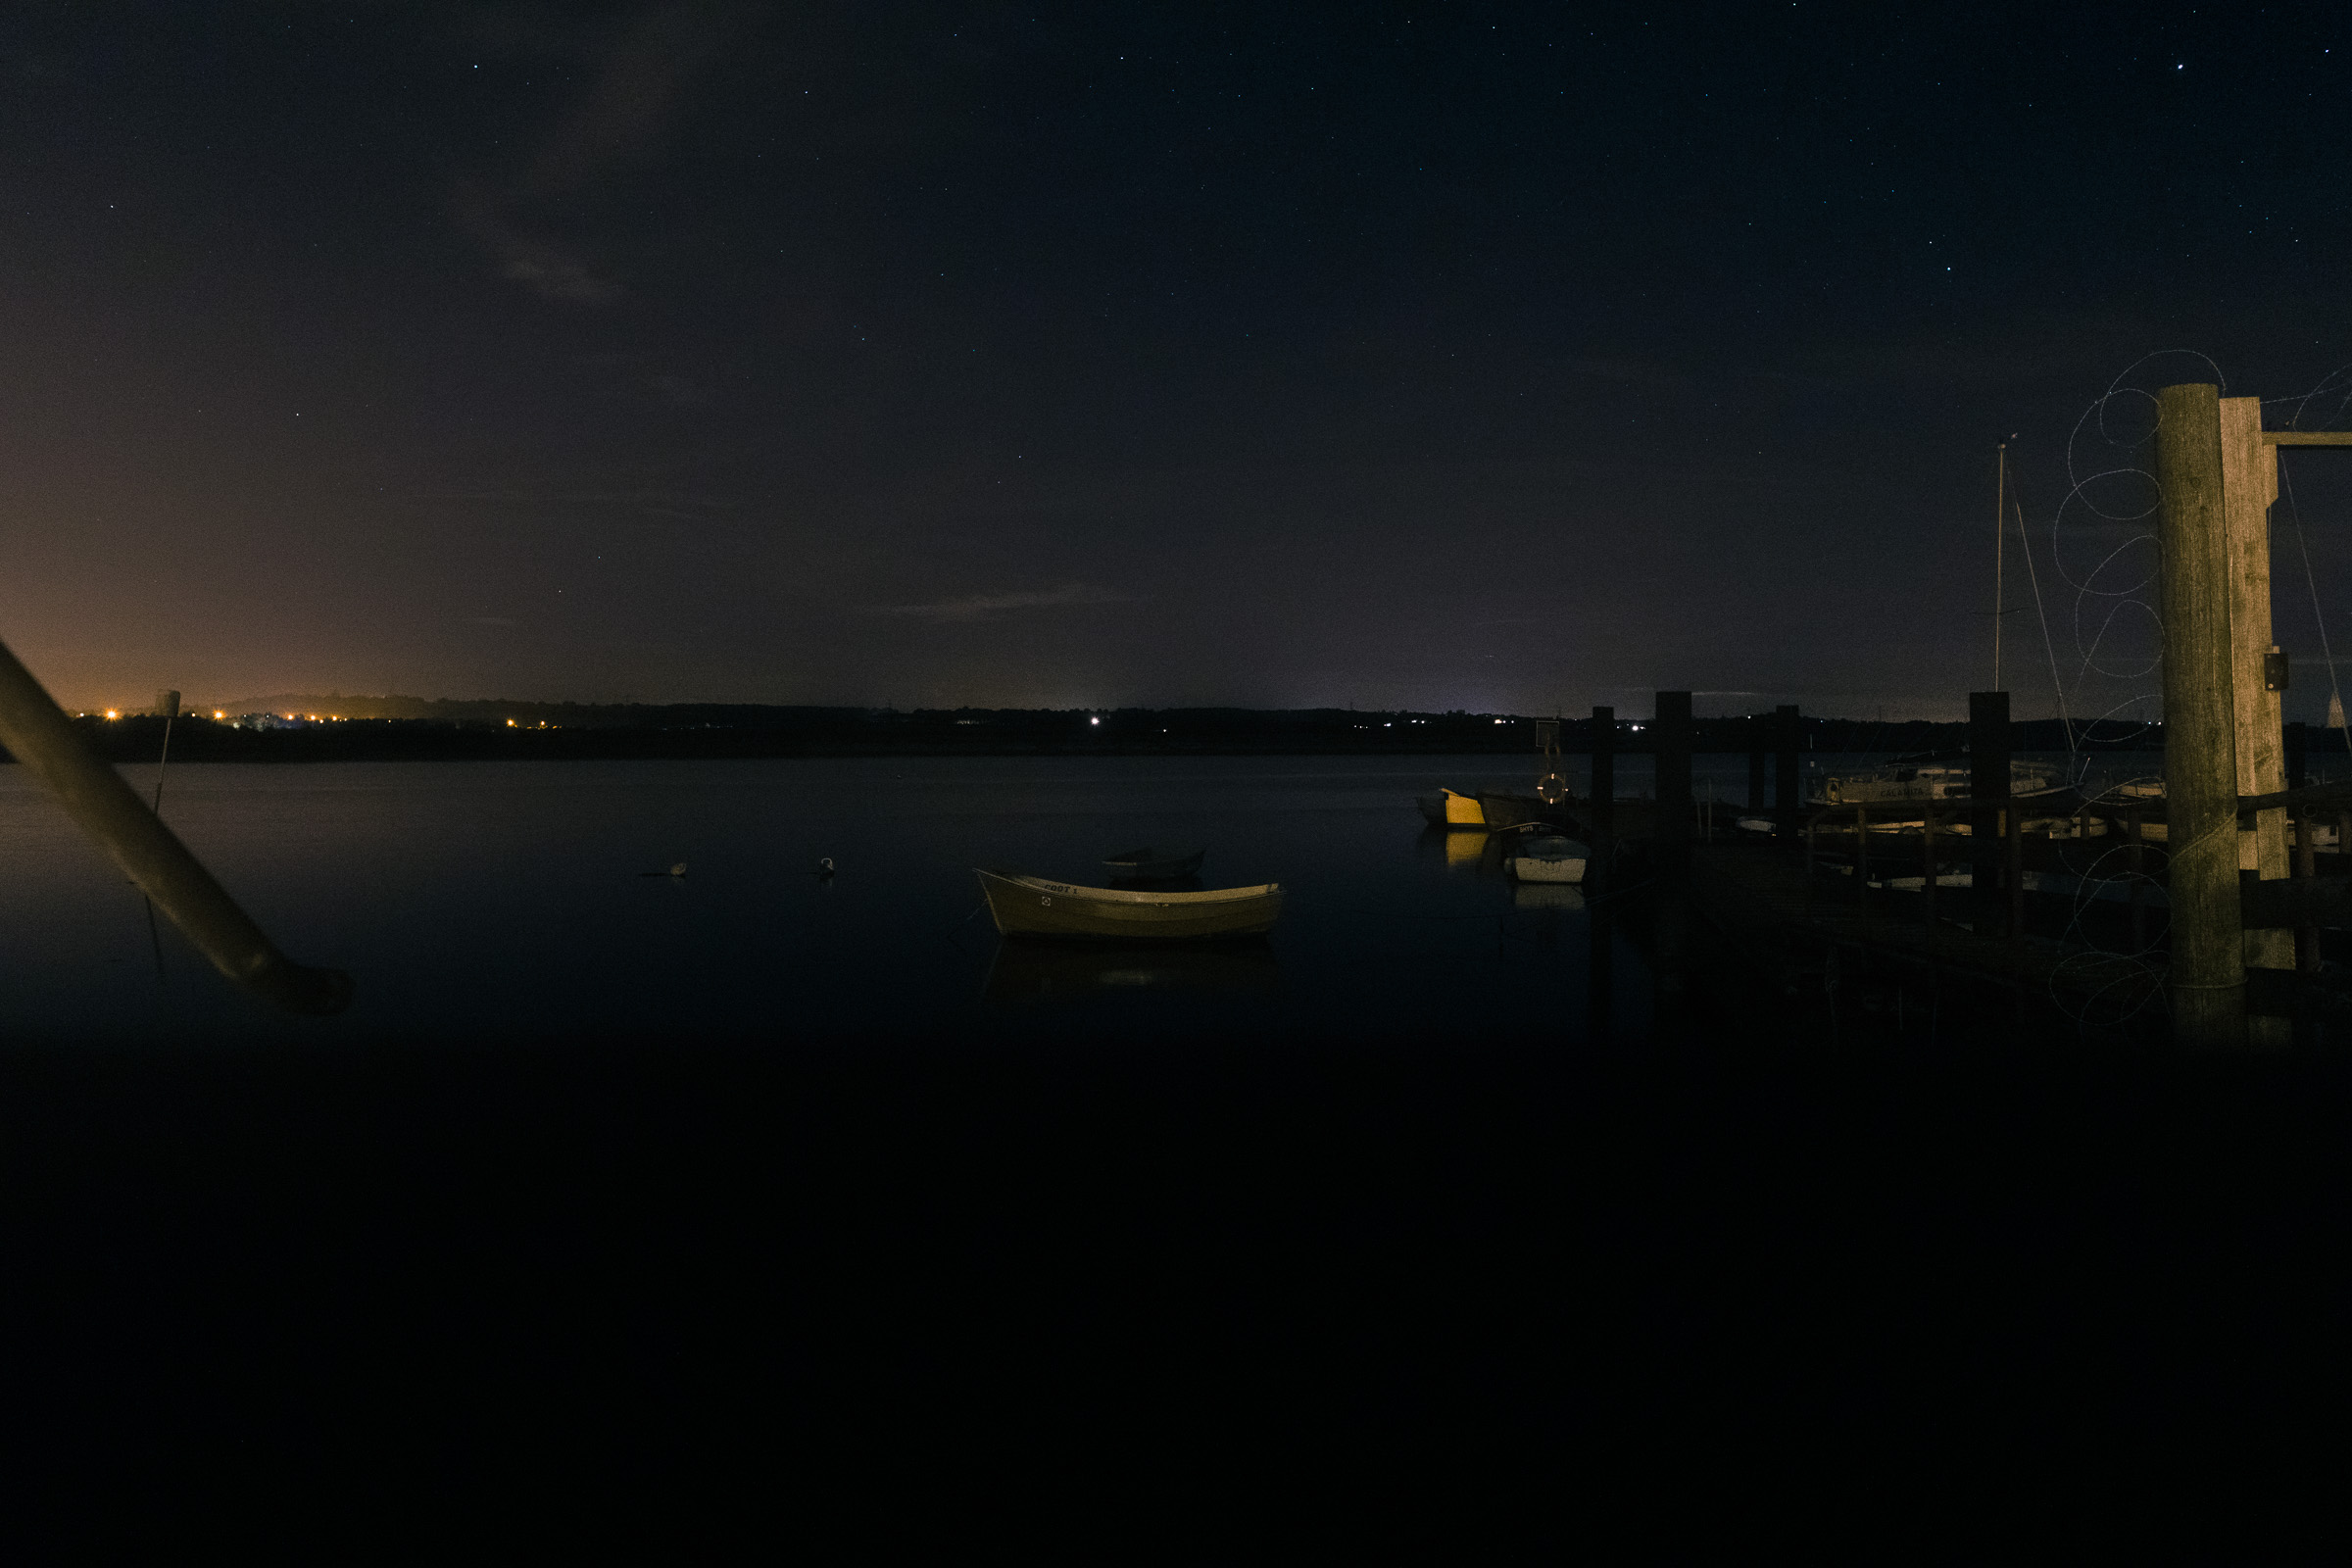 A boat on the River Crouch at night, outside the Brandy Hole in Hullbridge. You can see the stars in the sky and the glow of orange lights from South Woodham Ferrers across the river.